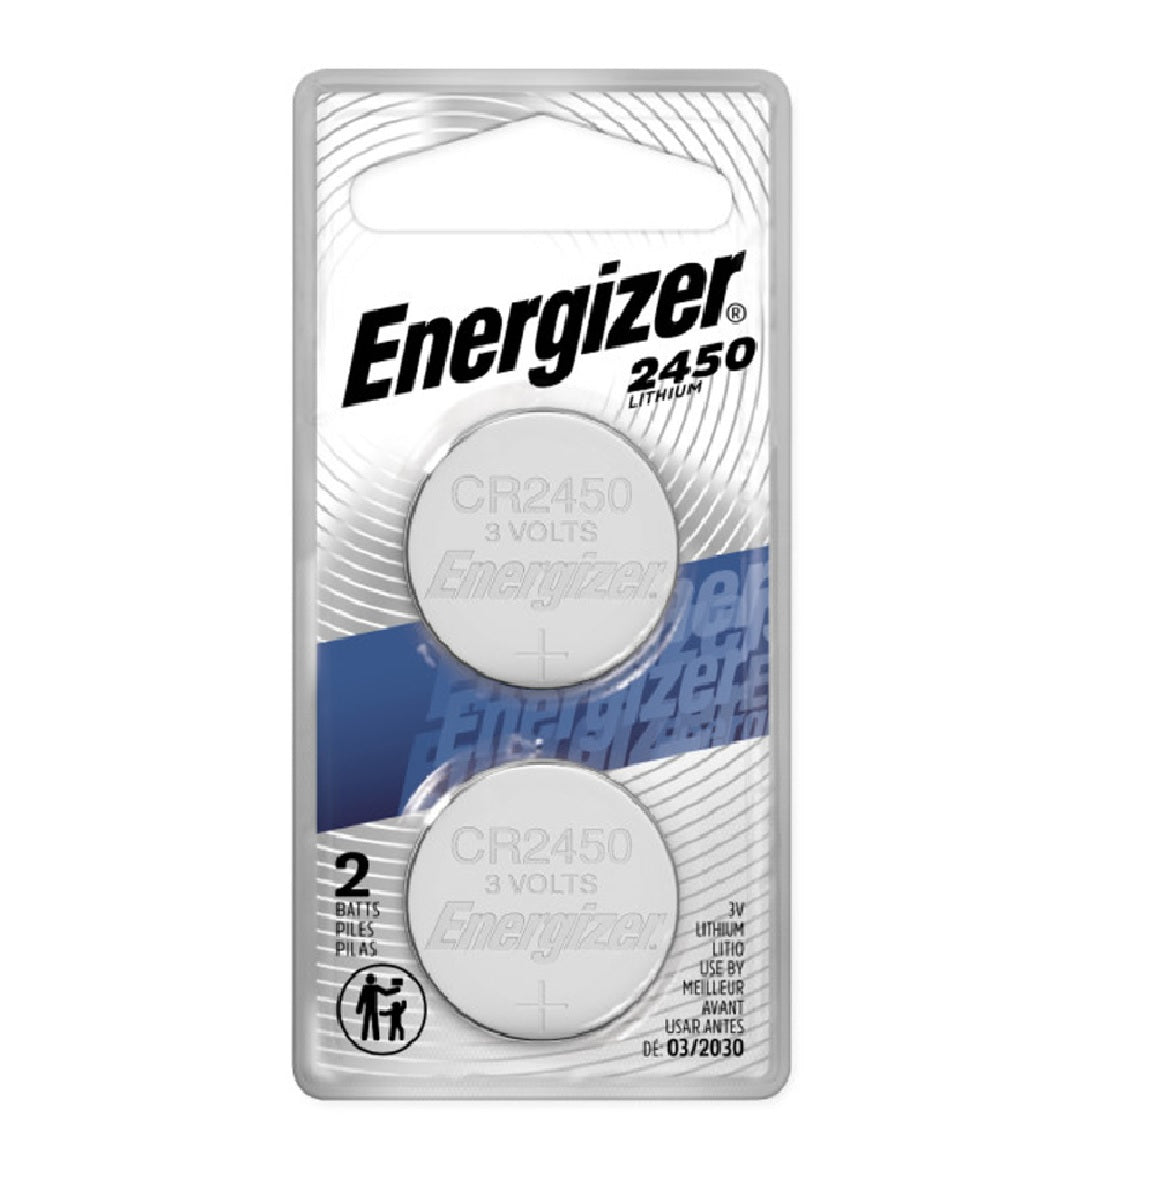 Energizer 2450BP-2N Lithium Button Cell Battery